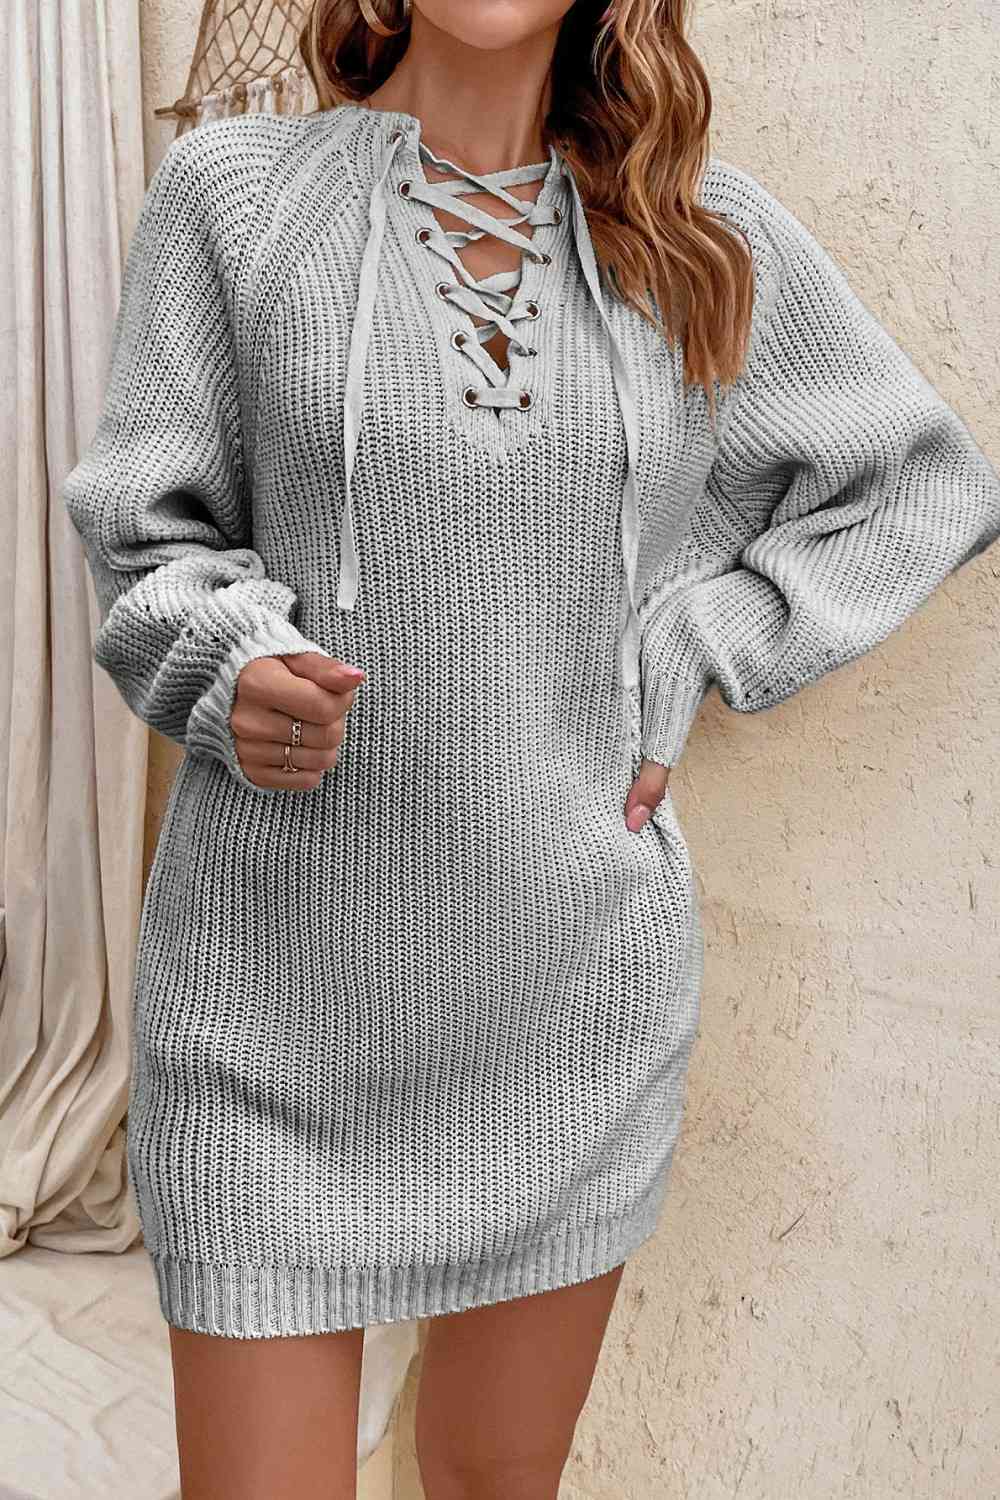 Lace-Up Mini Sweater Dress - Sweater Dresses - FITGGINS